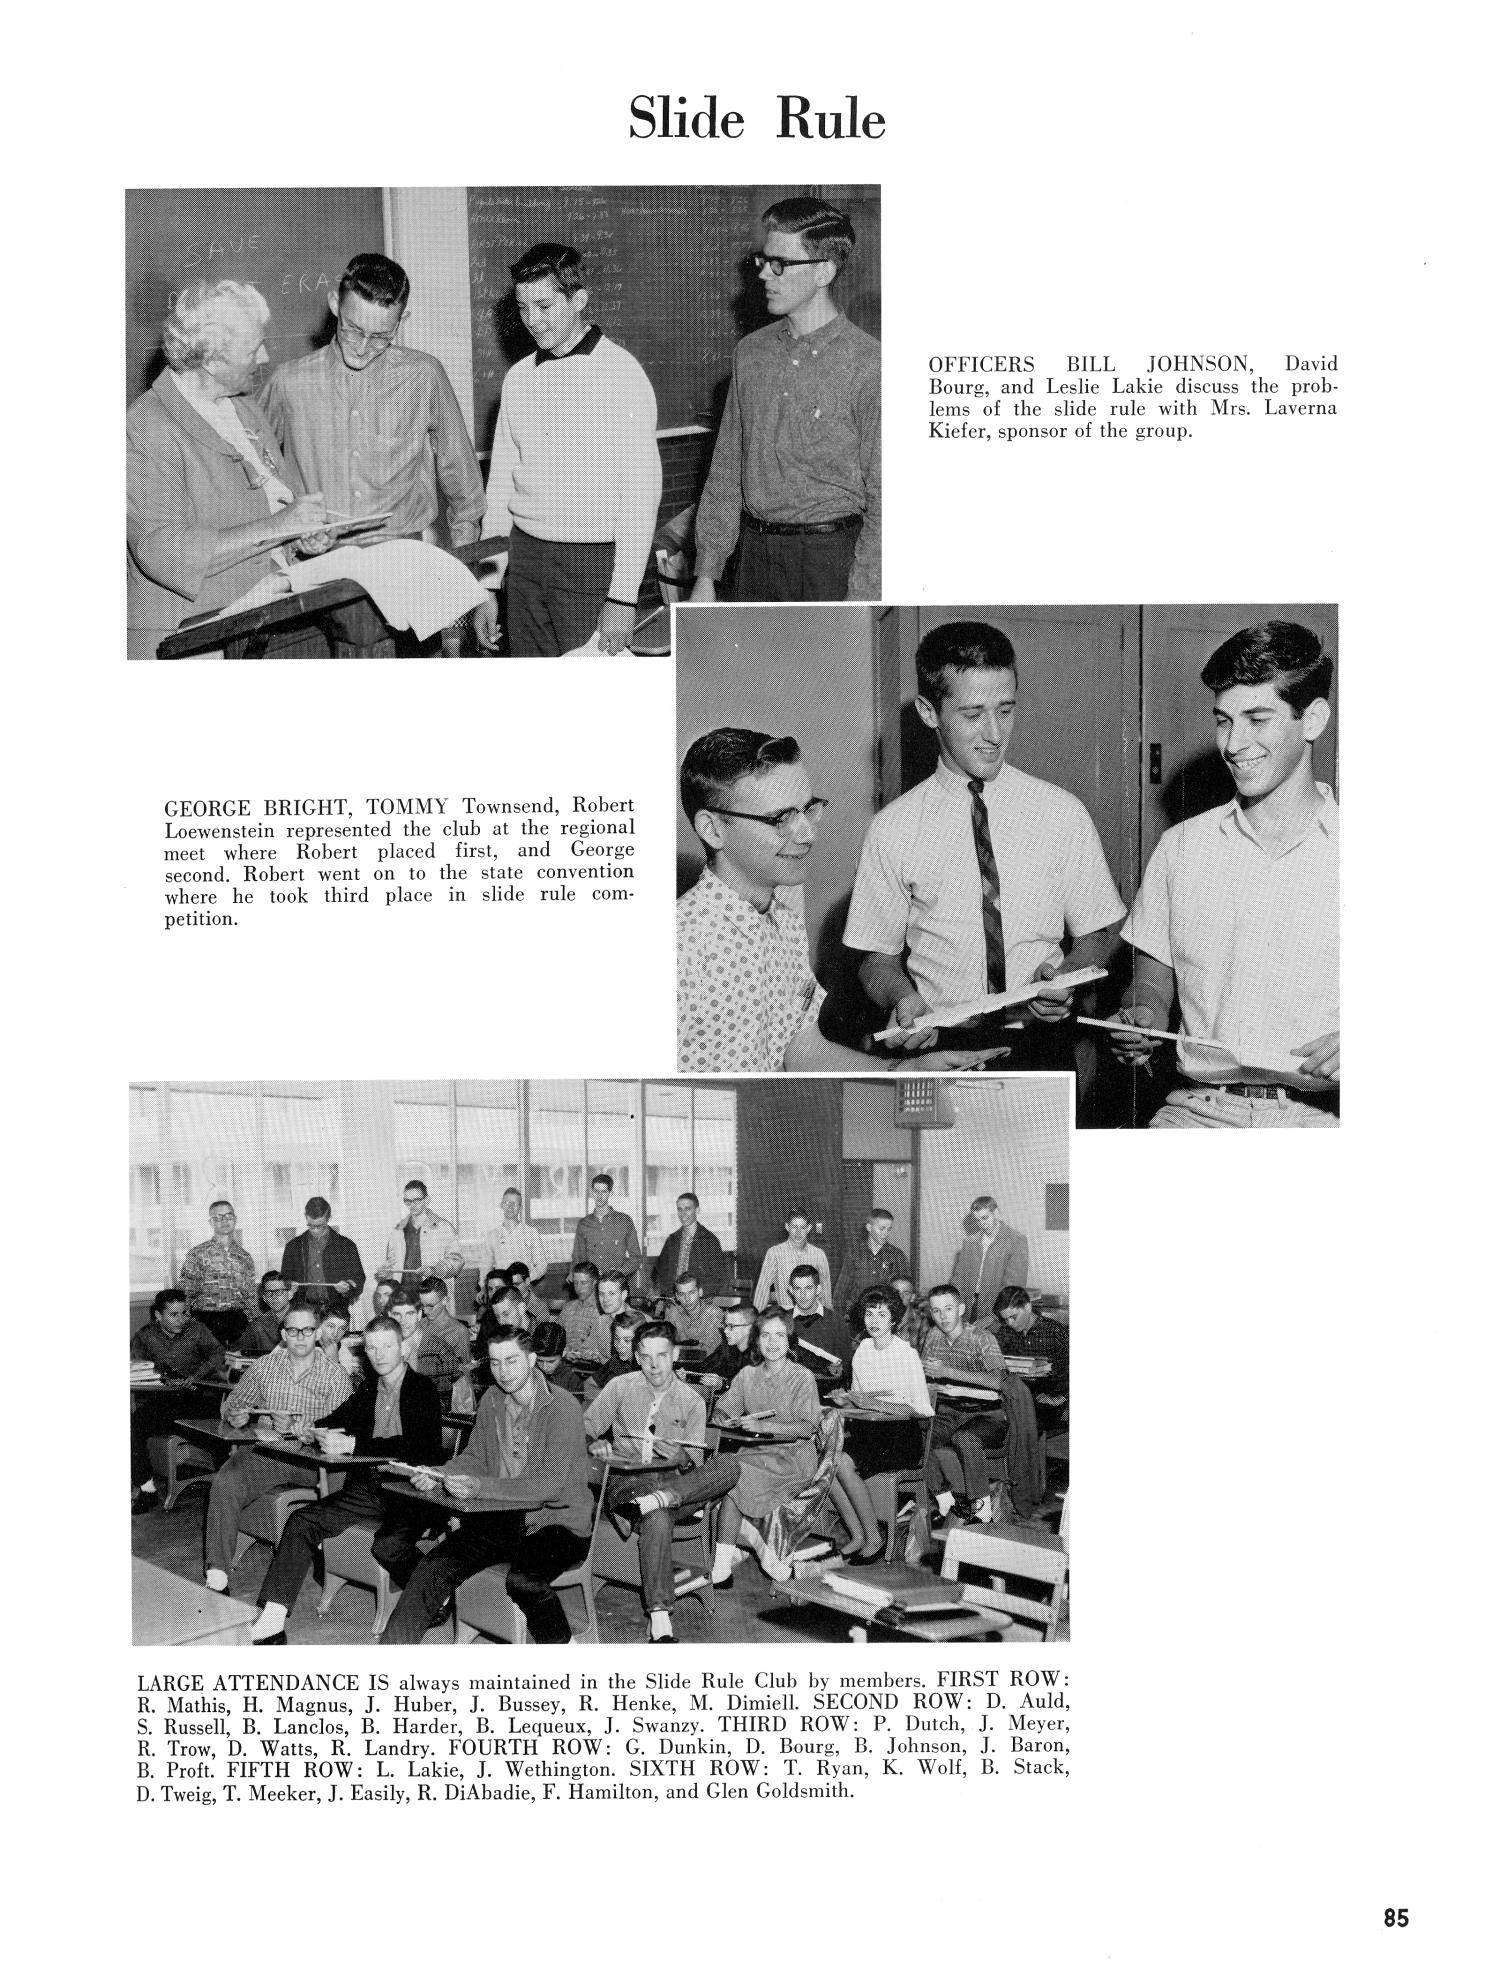 The Yellow Jacket, Yearbook of Thomas Jefferson High School, 1963
                                                
                                                    85
                                                